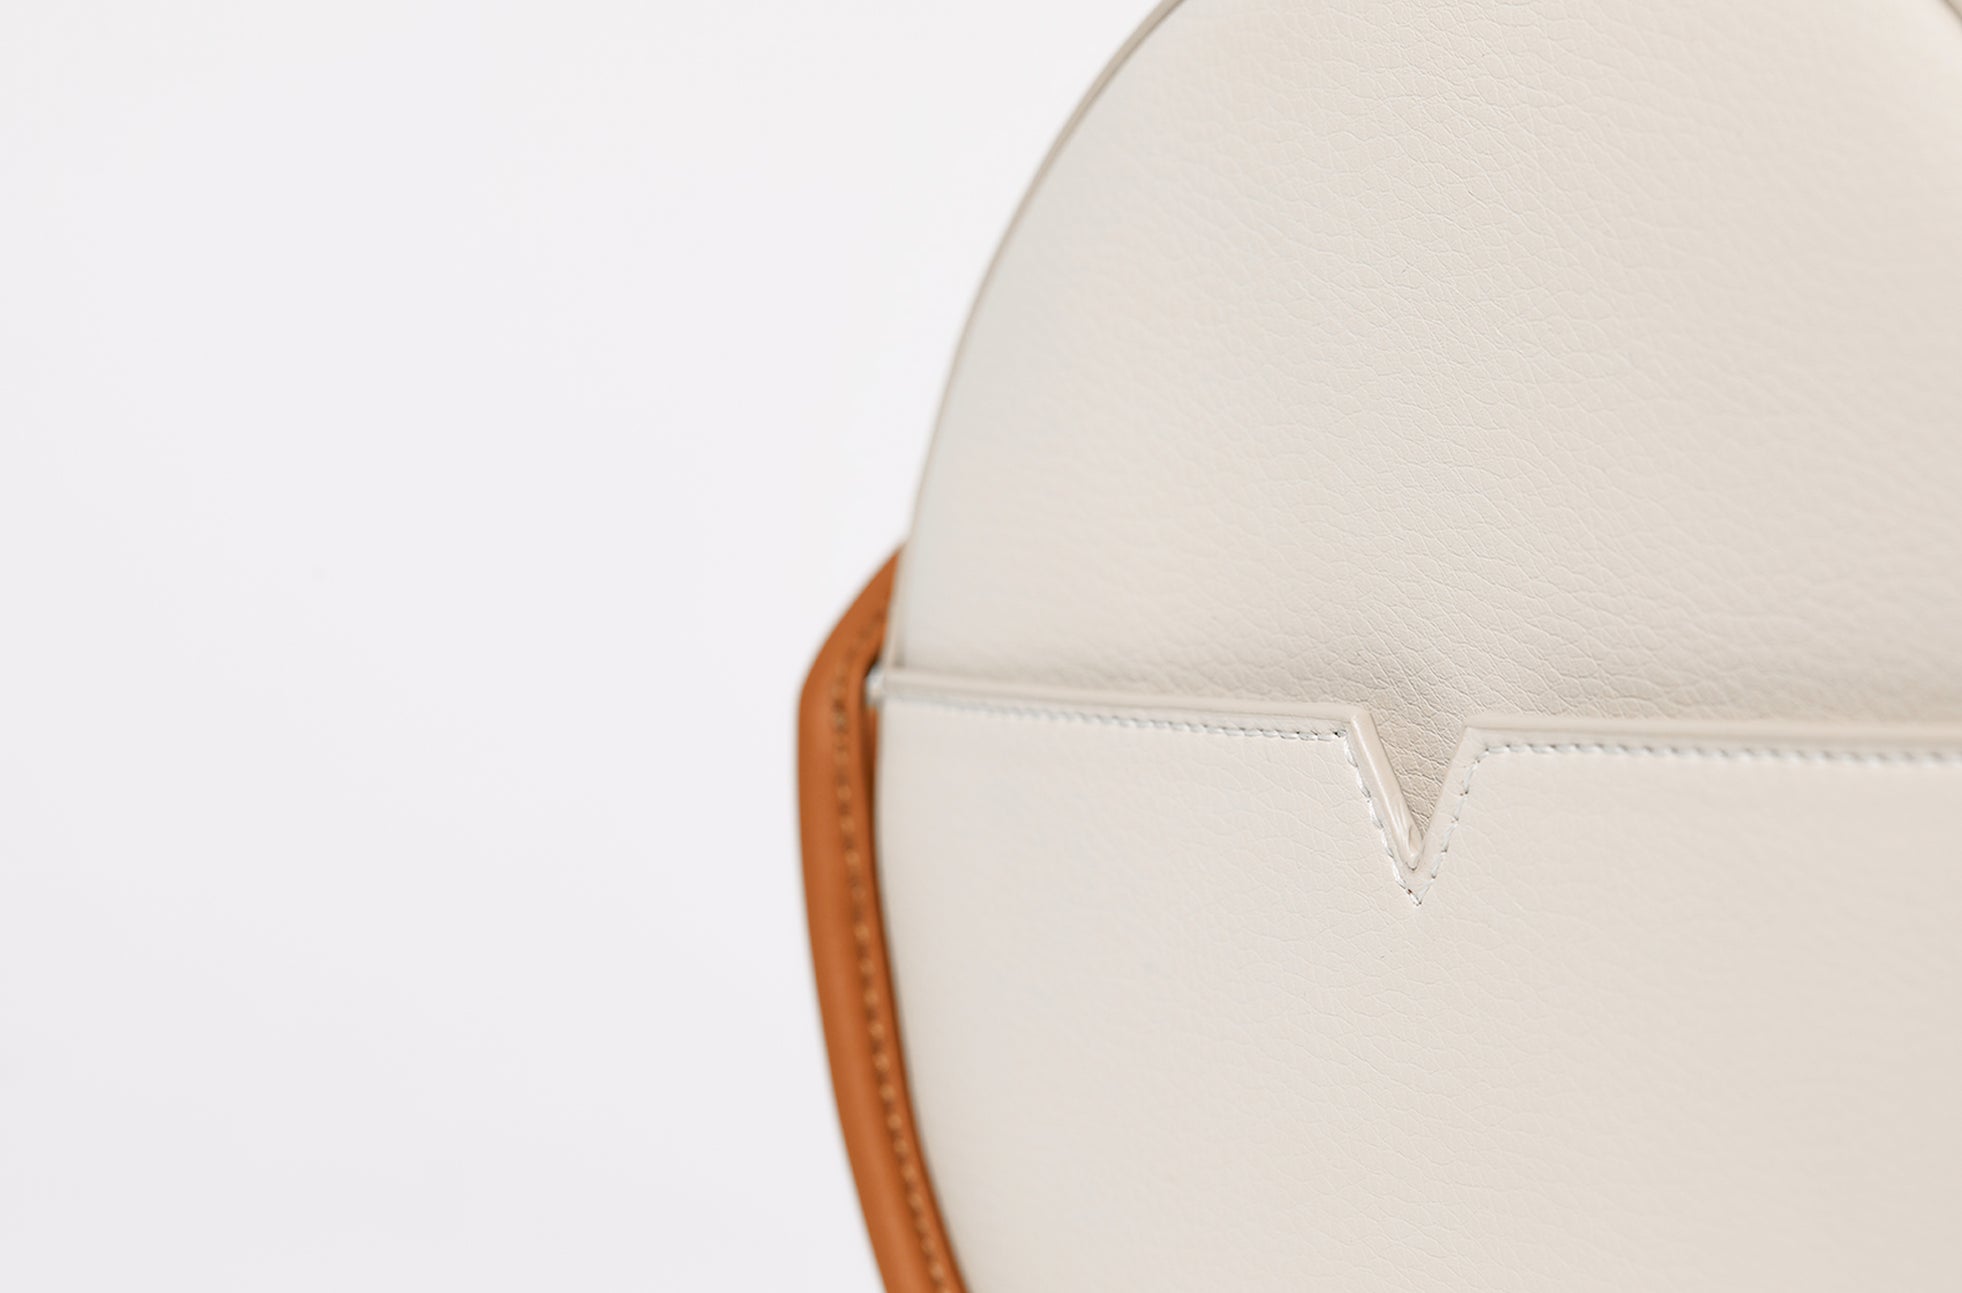 The Circle Crossbody in Banbū in Oat image 9